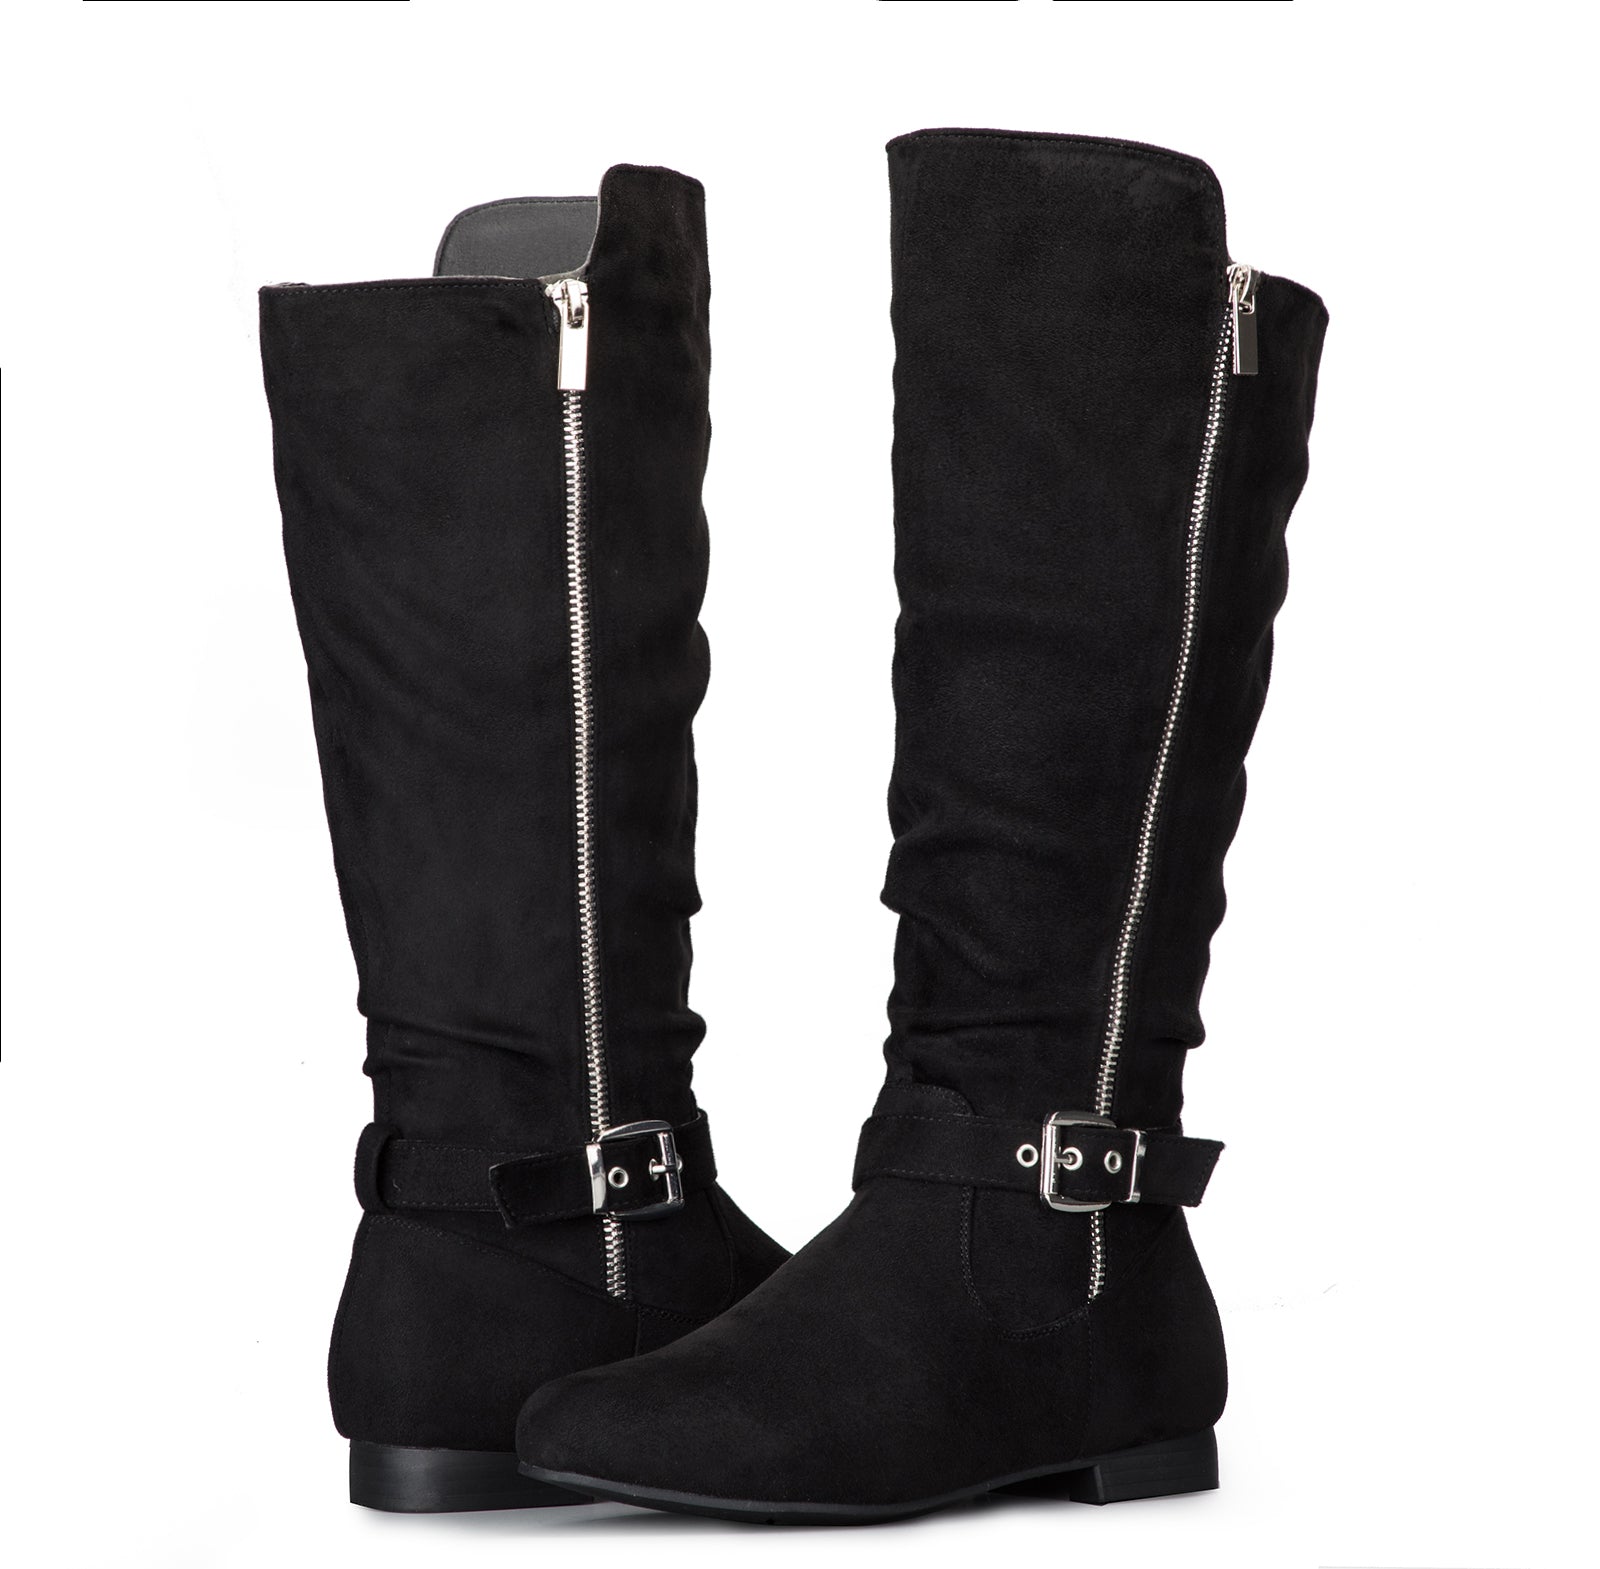 Stacked Knee High Boots with Side Zipper - MYSOFT